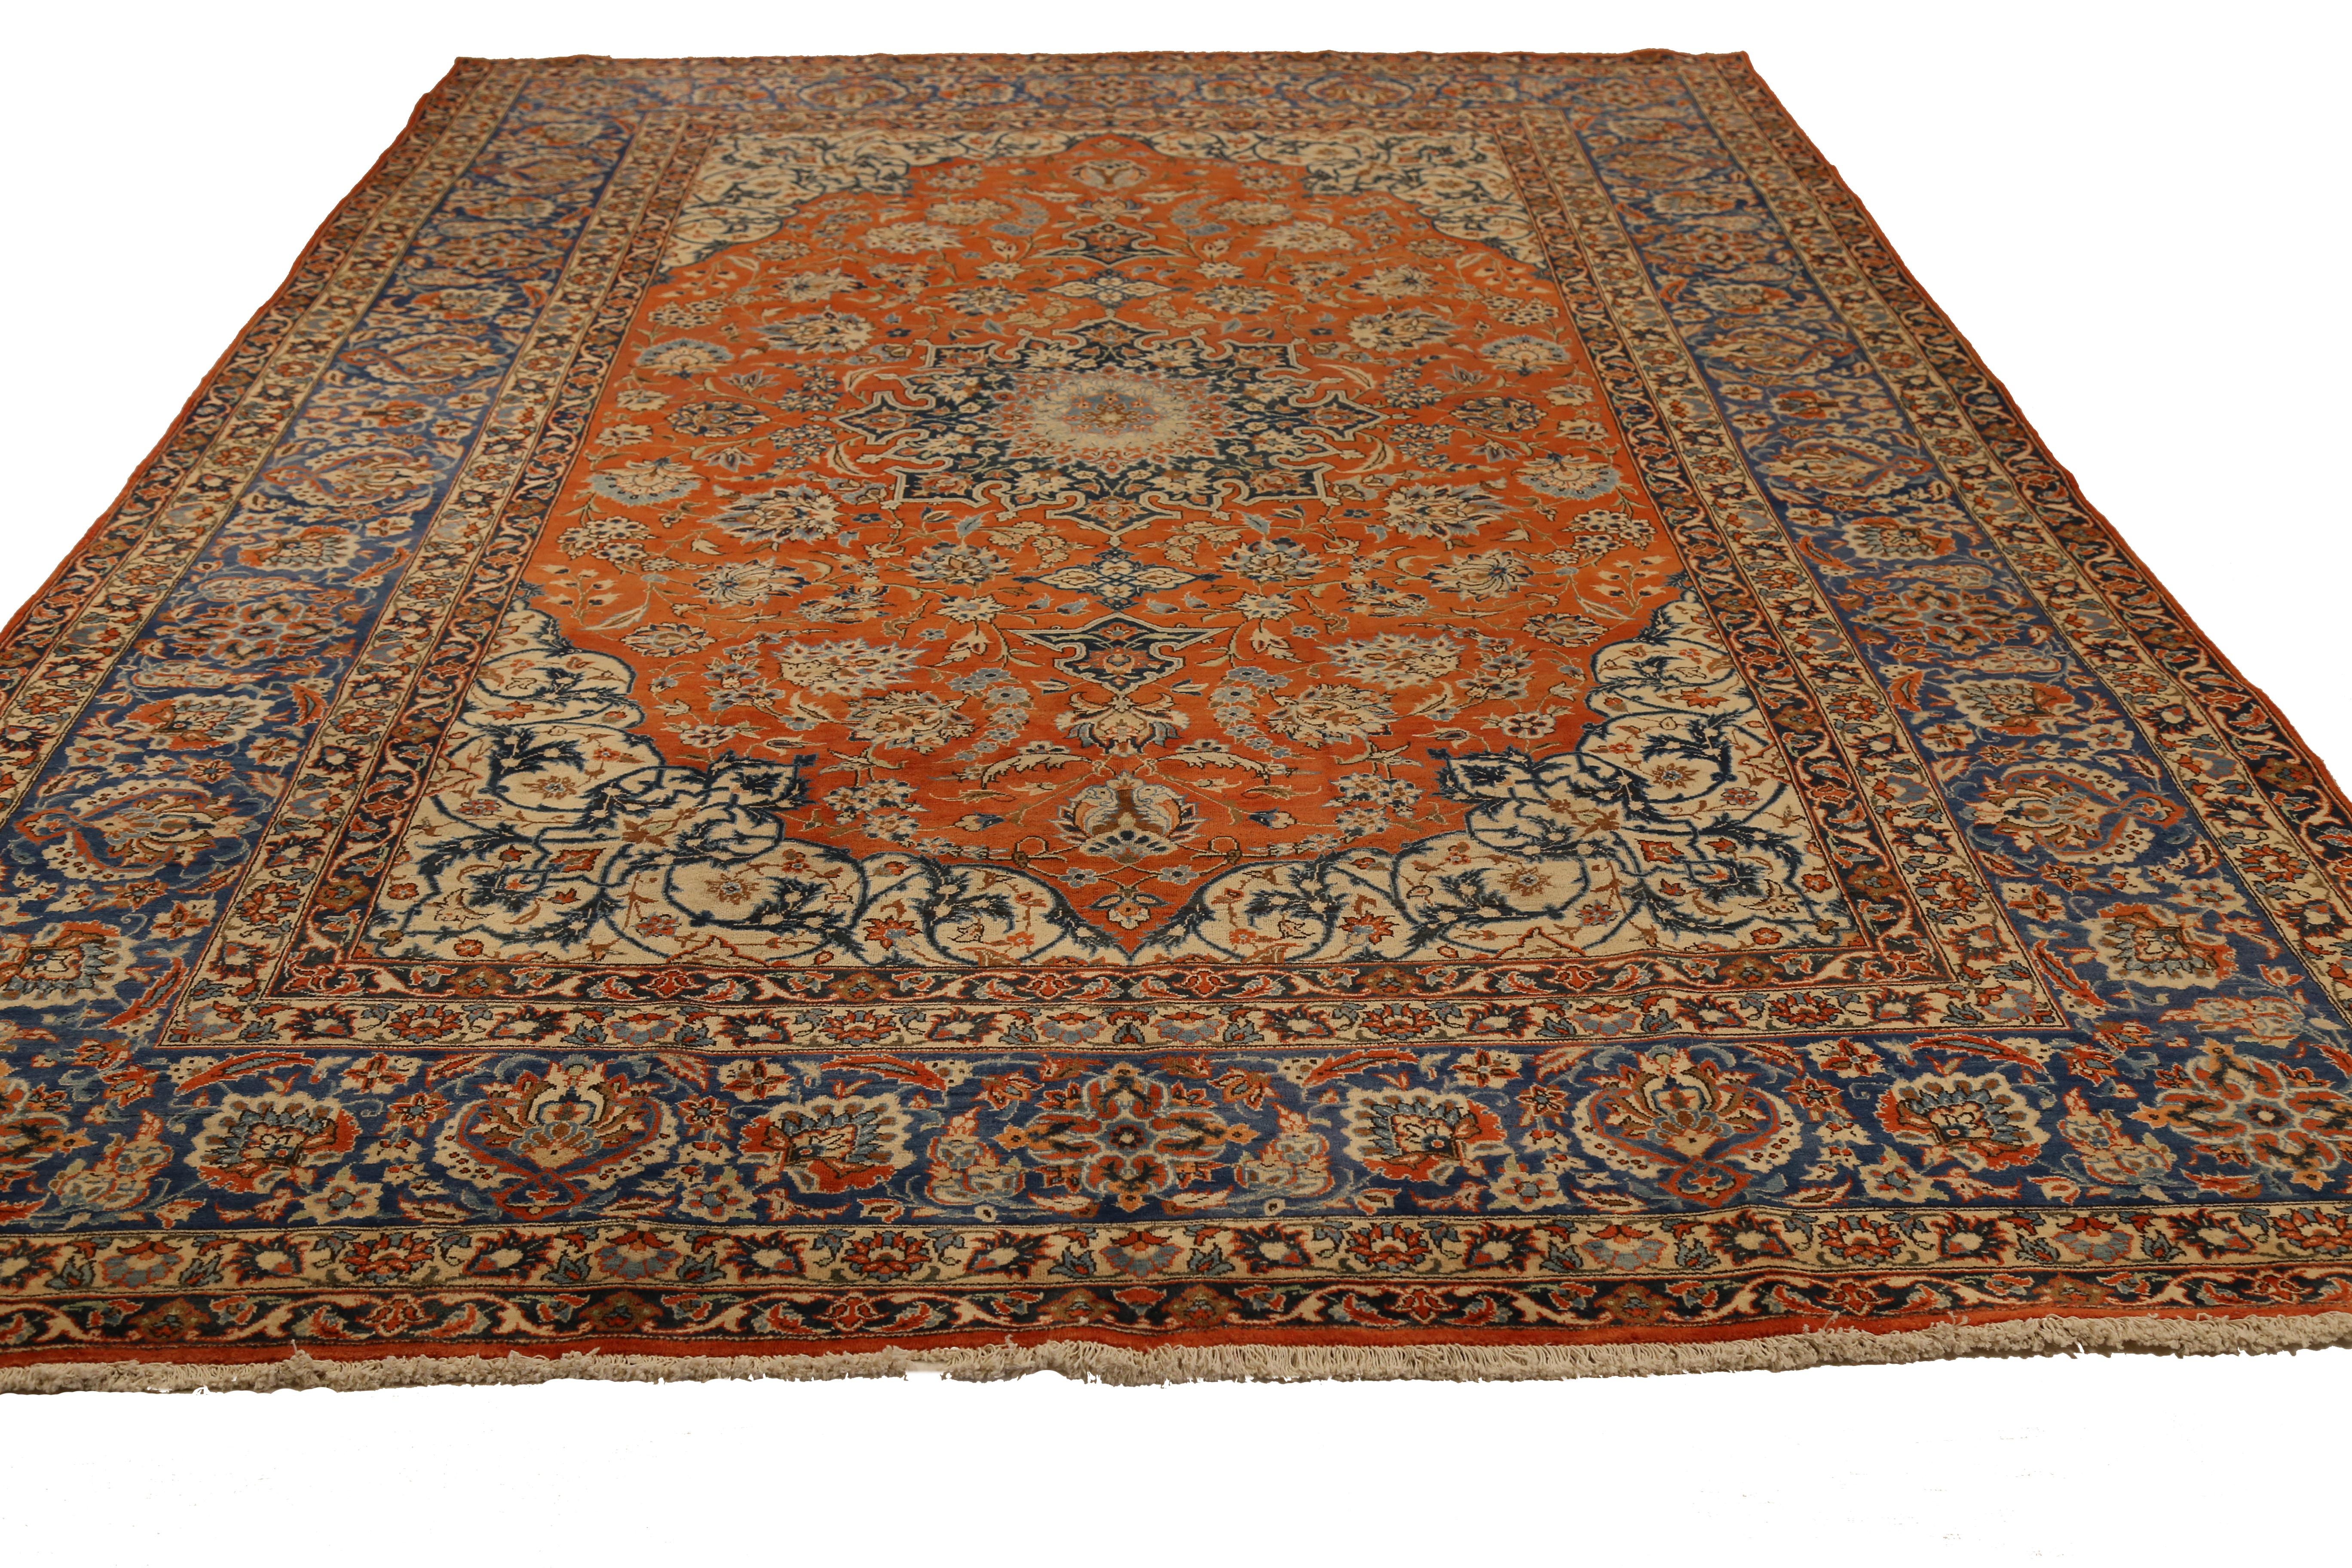 Mid-20th century hand knotted Persian area rug made from fine wool and all-natural vegetable dyes that are safe for people and pets. This beautiful piece features ornate floral patterns in various colors which Isfahan rugs are known for. Persian